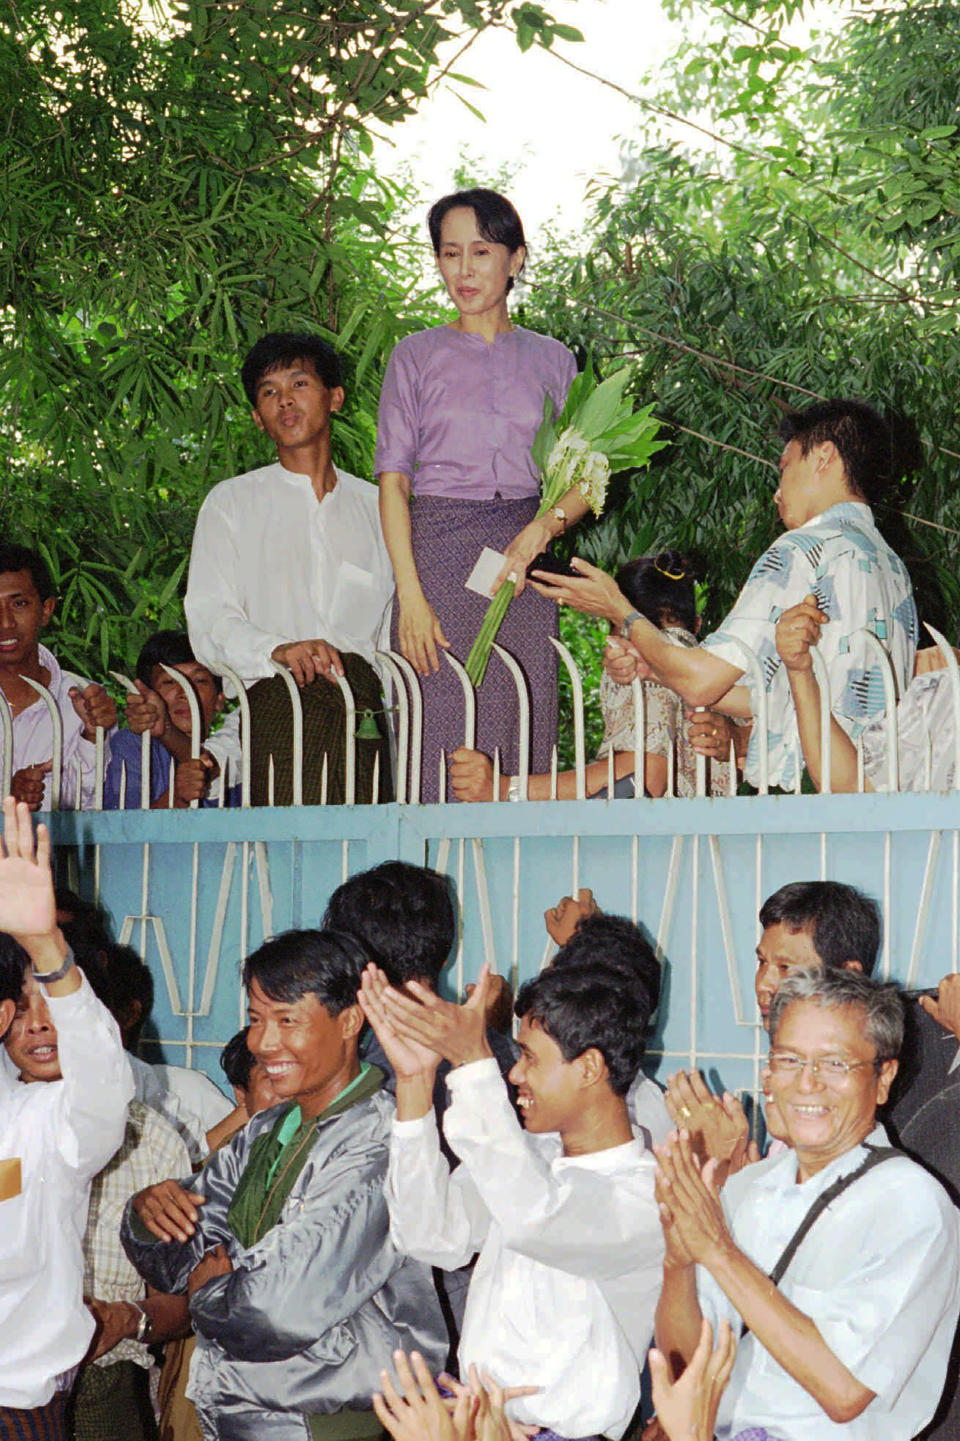 FILE - Aung San Suu Kyi, top center, stands behind her gate to greet a crowd of about 1,000 people who came to see her in Rangoon, Burma on July 11, 1995. Myanmar court on Monday, Dec. 6, 2021, sentenced ousted leader Suu Kyi to 4 years for incitement and breaking virus restrictions, then later in the day state TV announced that the country's military leader reduced the sentence by two years. (AP Photo/Stuart Isett, File)